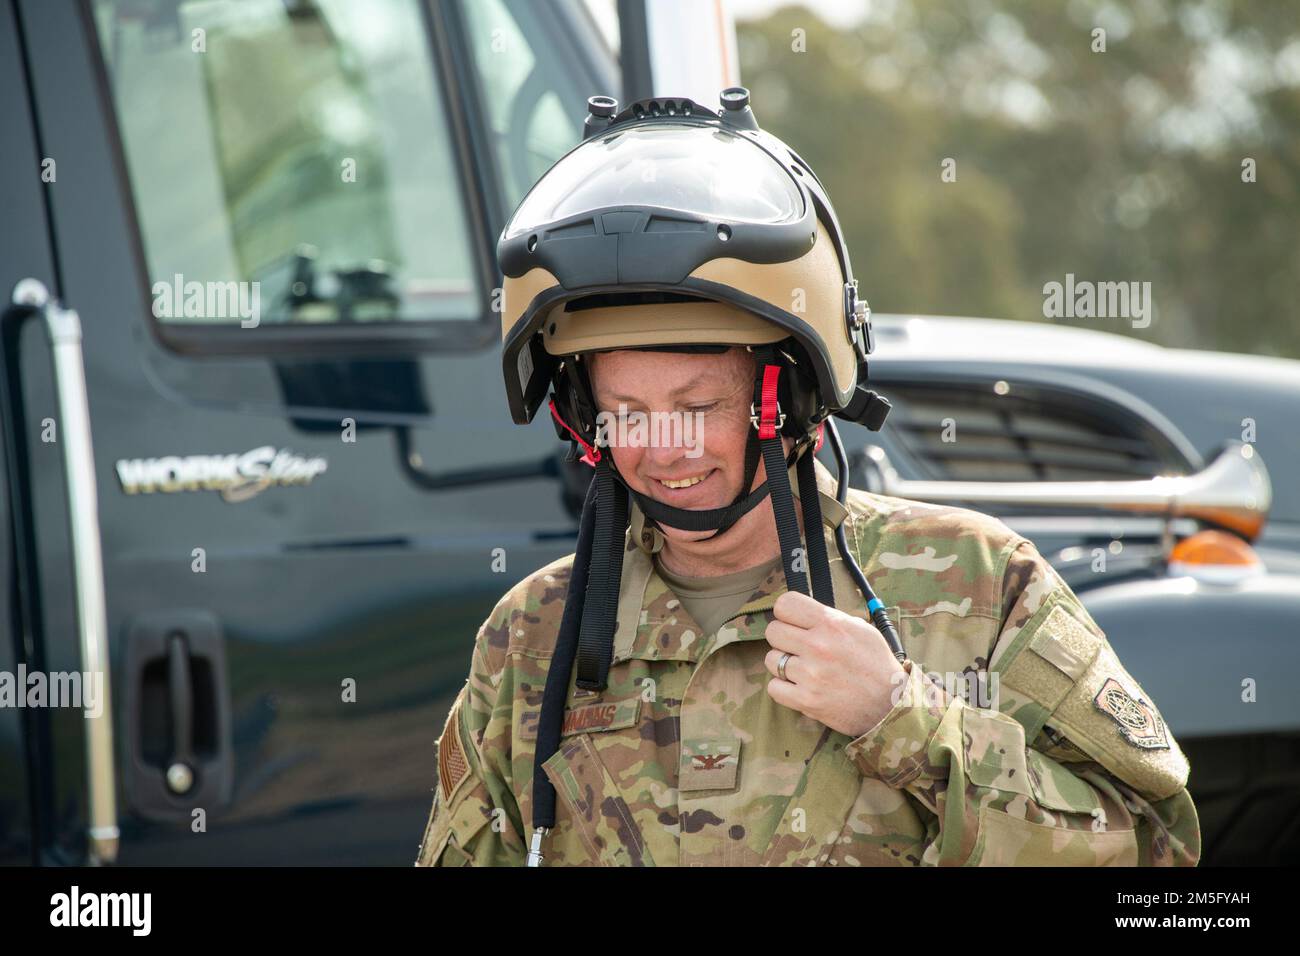 U.S. Air Force Col. Corey Simmons, 60th Air Mobility Wing commander, wears an Explosive Ordnance Disposal blast suit helmet during a visit to the EOD range at Travis Air Force Base, California, March 15, 2022. The helmet is designed to protect against the four main blast threats: overpressure, fragmentation, impact and heat. Trained to detect, disarm and dispose of explosive threats in extreme environments, EOD technicians serve as the Air Force’s bomb squad. Stock Photo